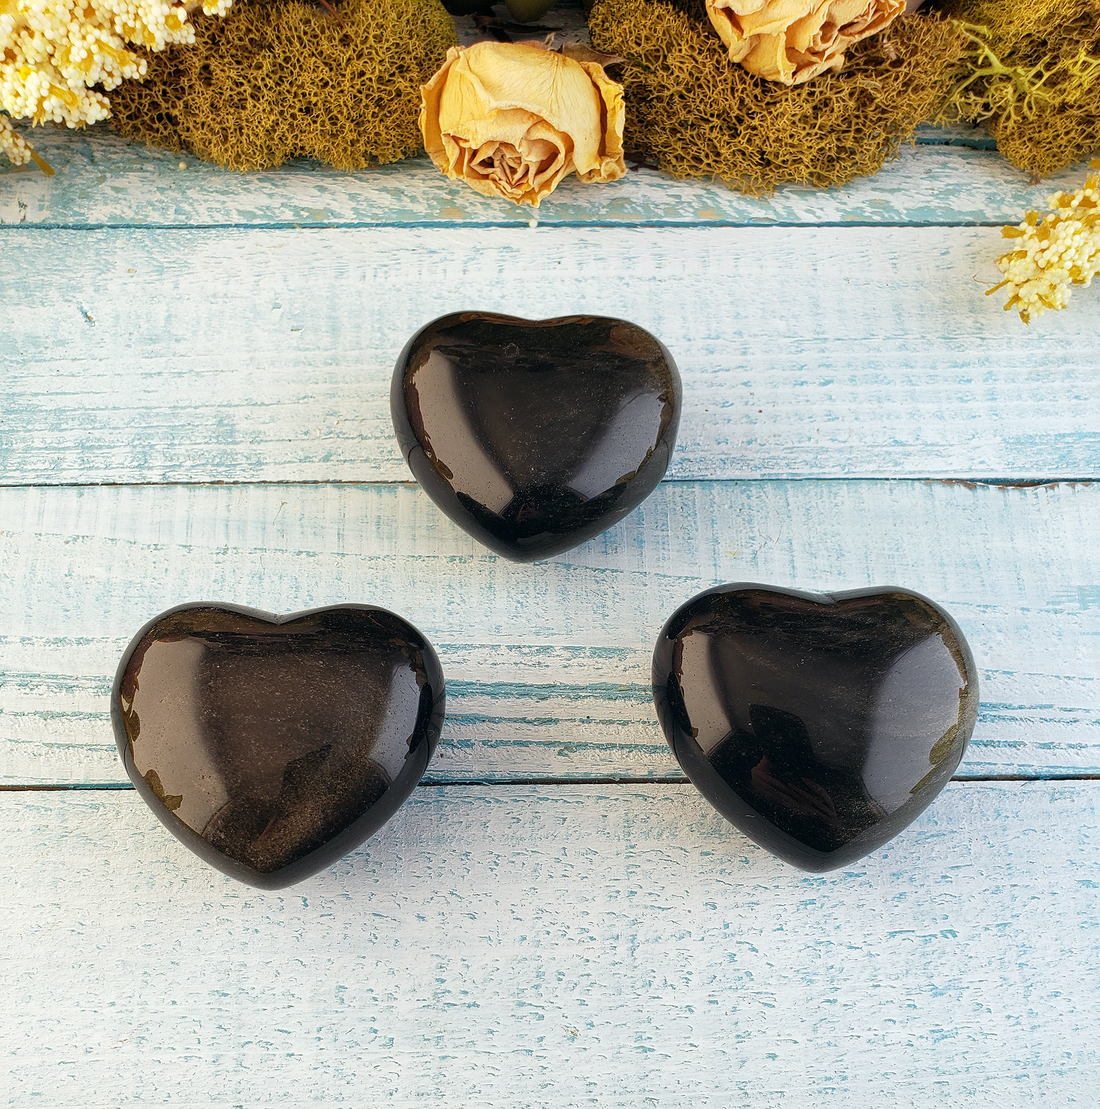 Gold Sheen Obsidian Gemstone Puffy Heart Carving